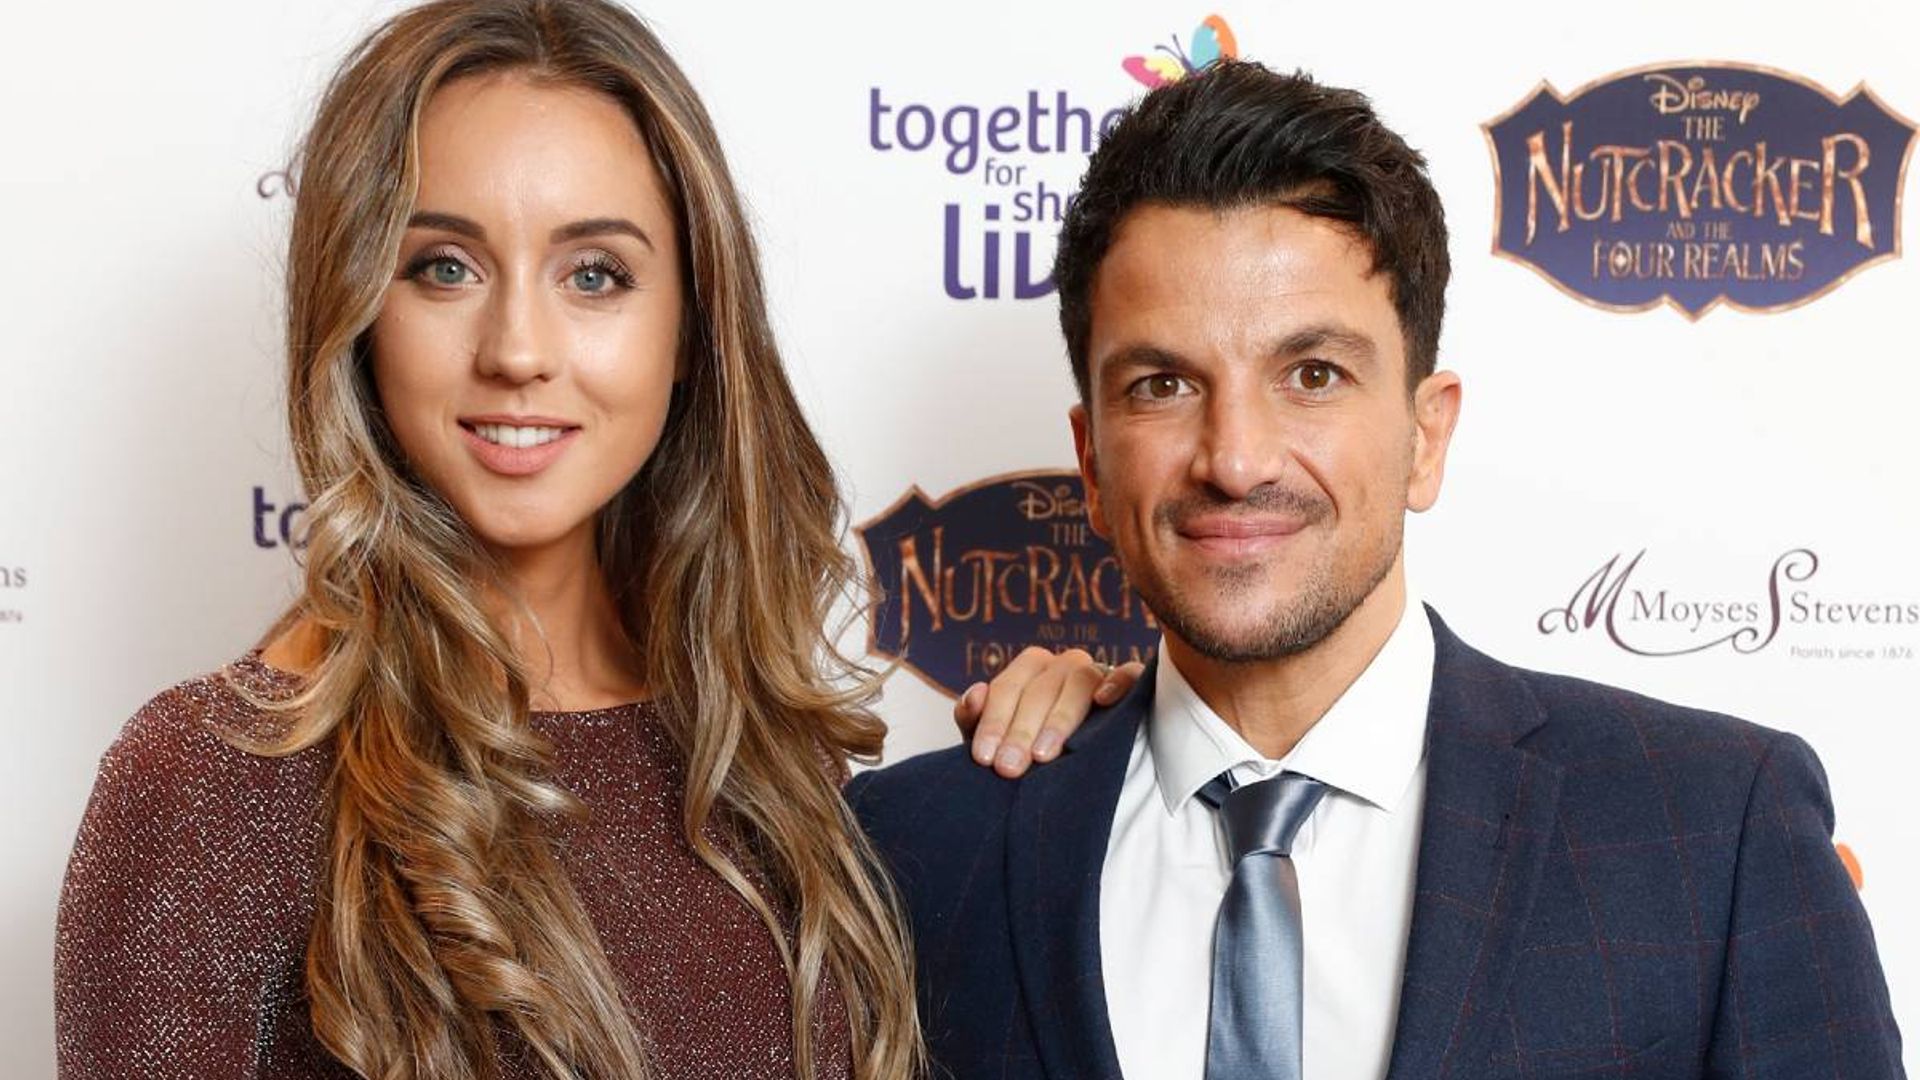 Peter Andre shares post after Katie Price criticises his wife Emily in now-deleted message